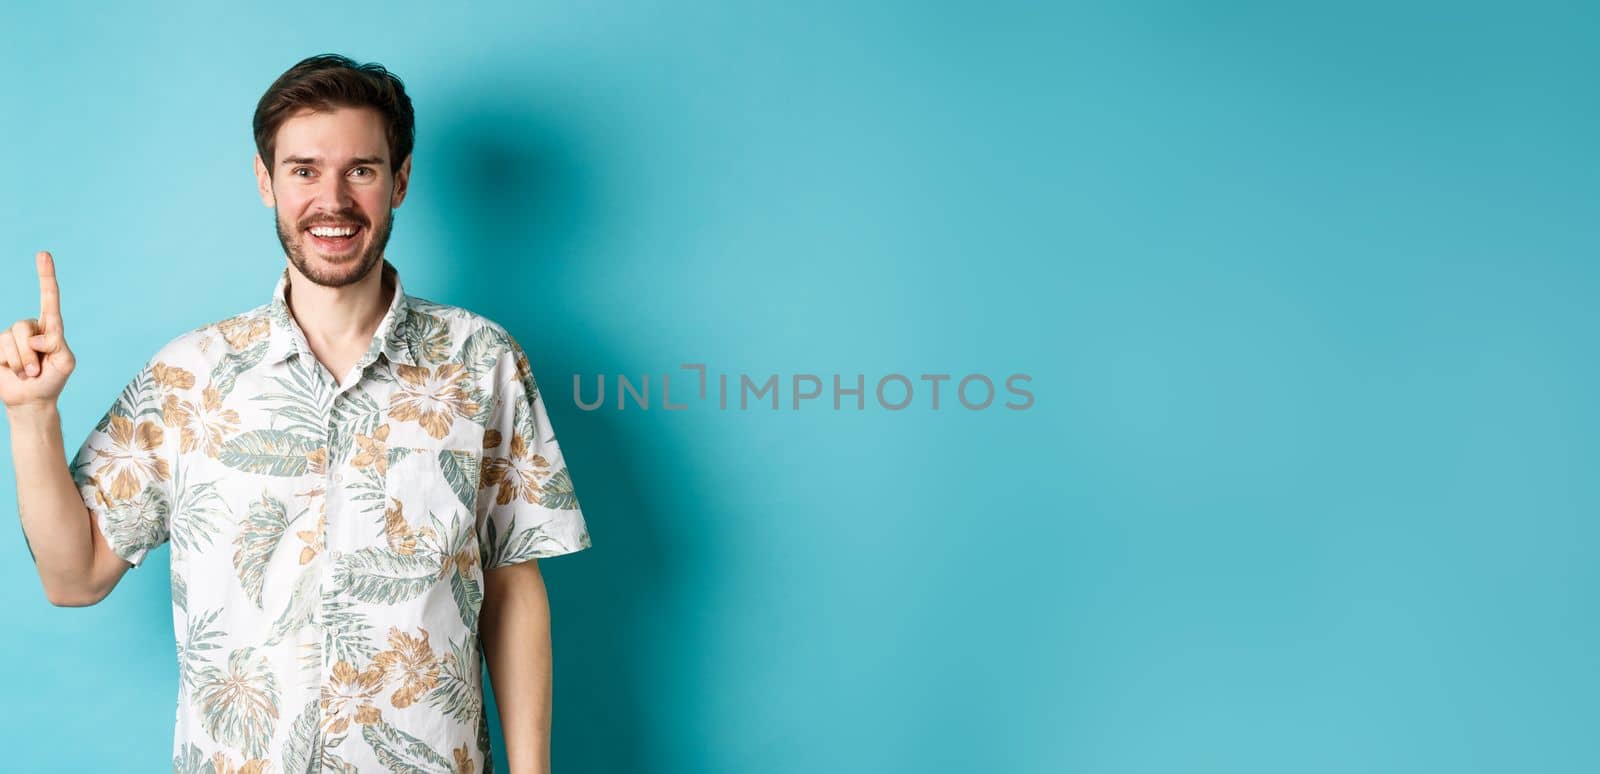 Happy tourist in hawaiian shirt smiling and pointing finger up, showing logo promotion, standing on blue background.